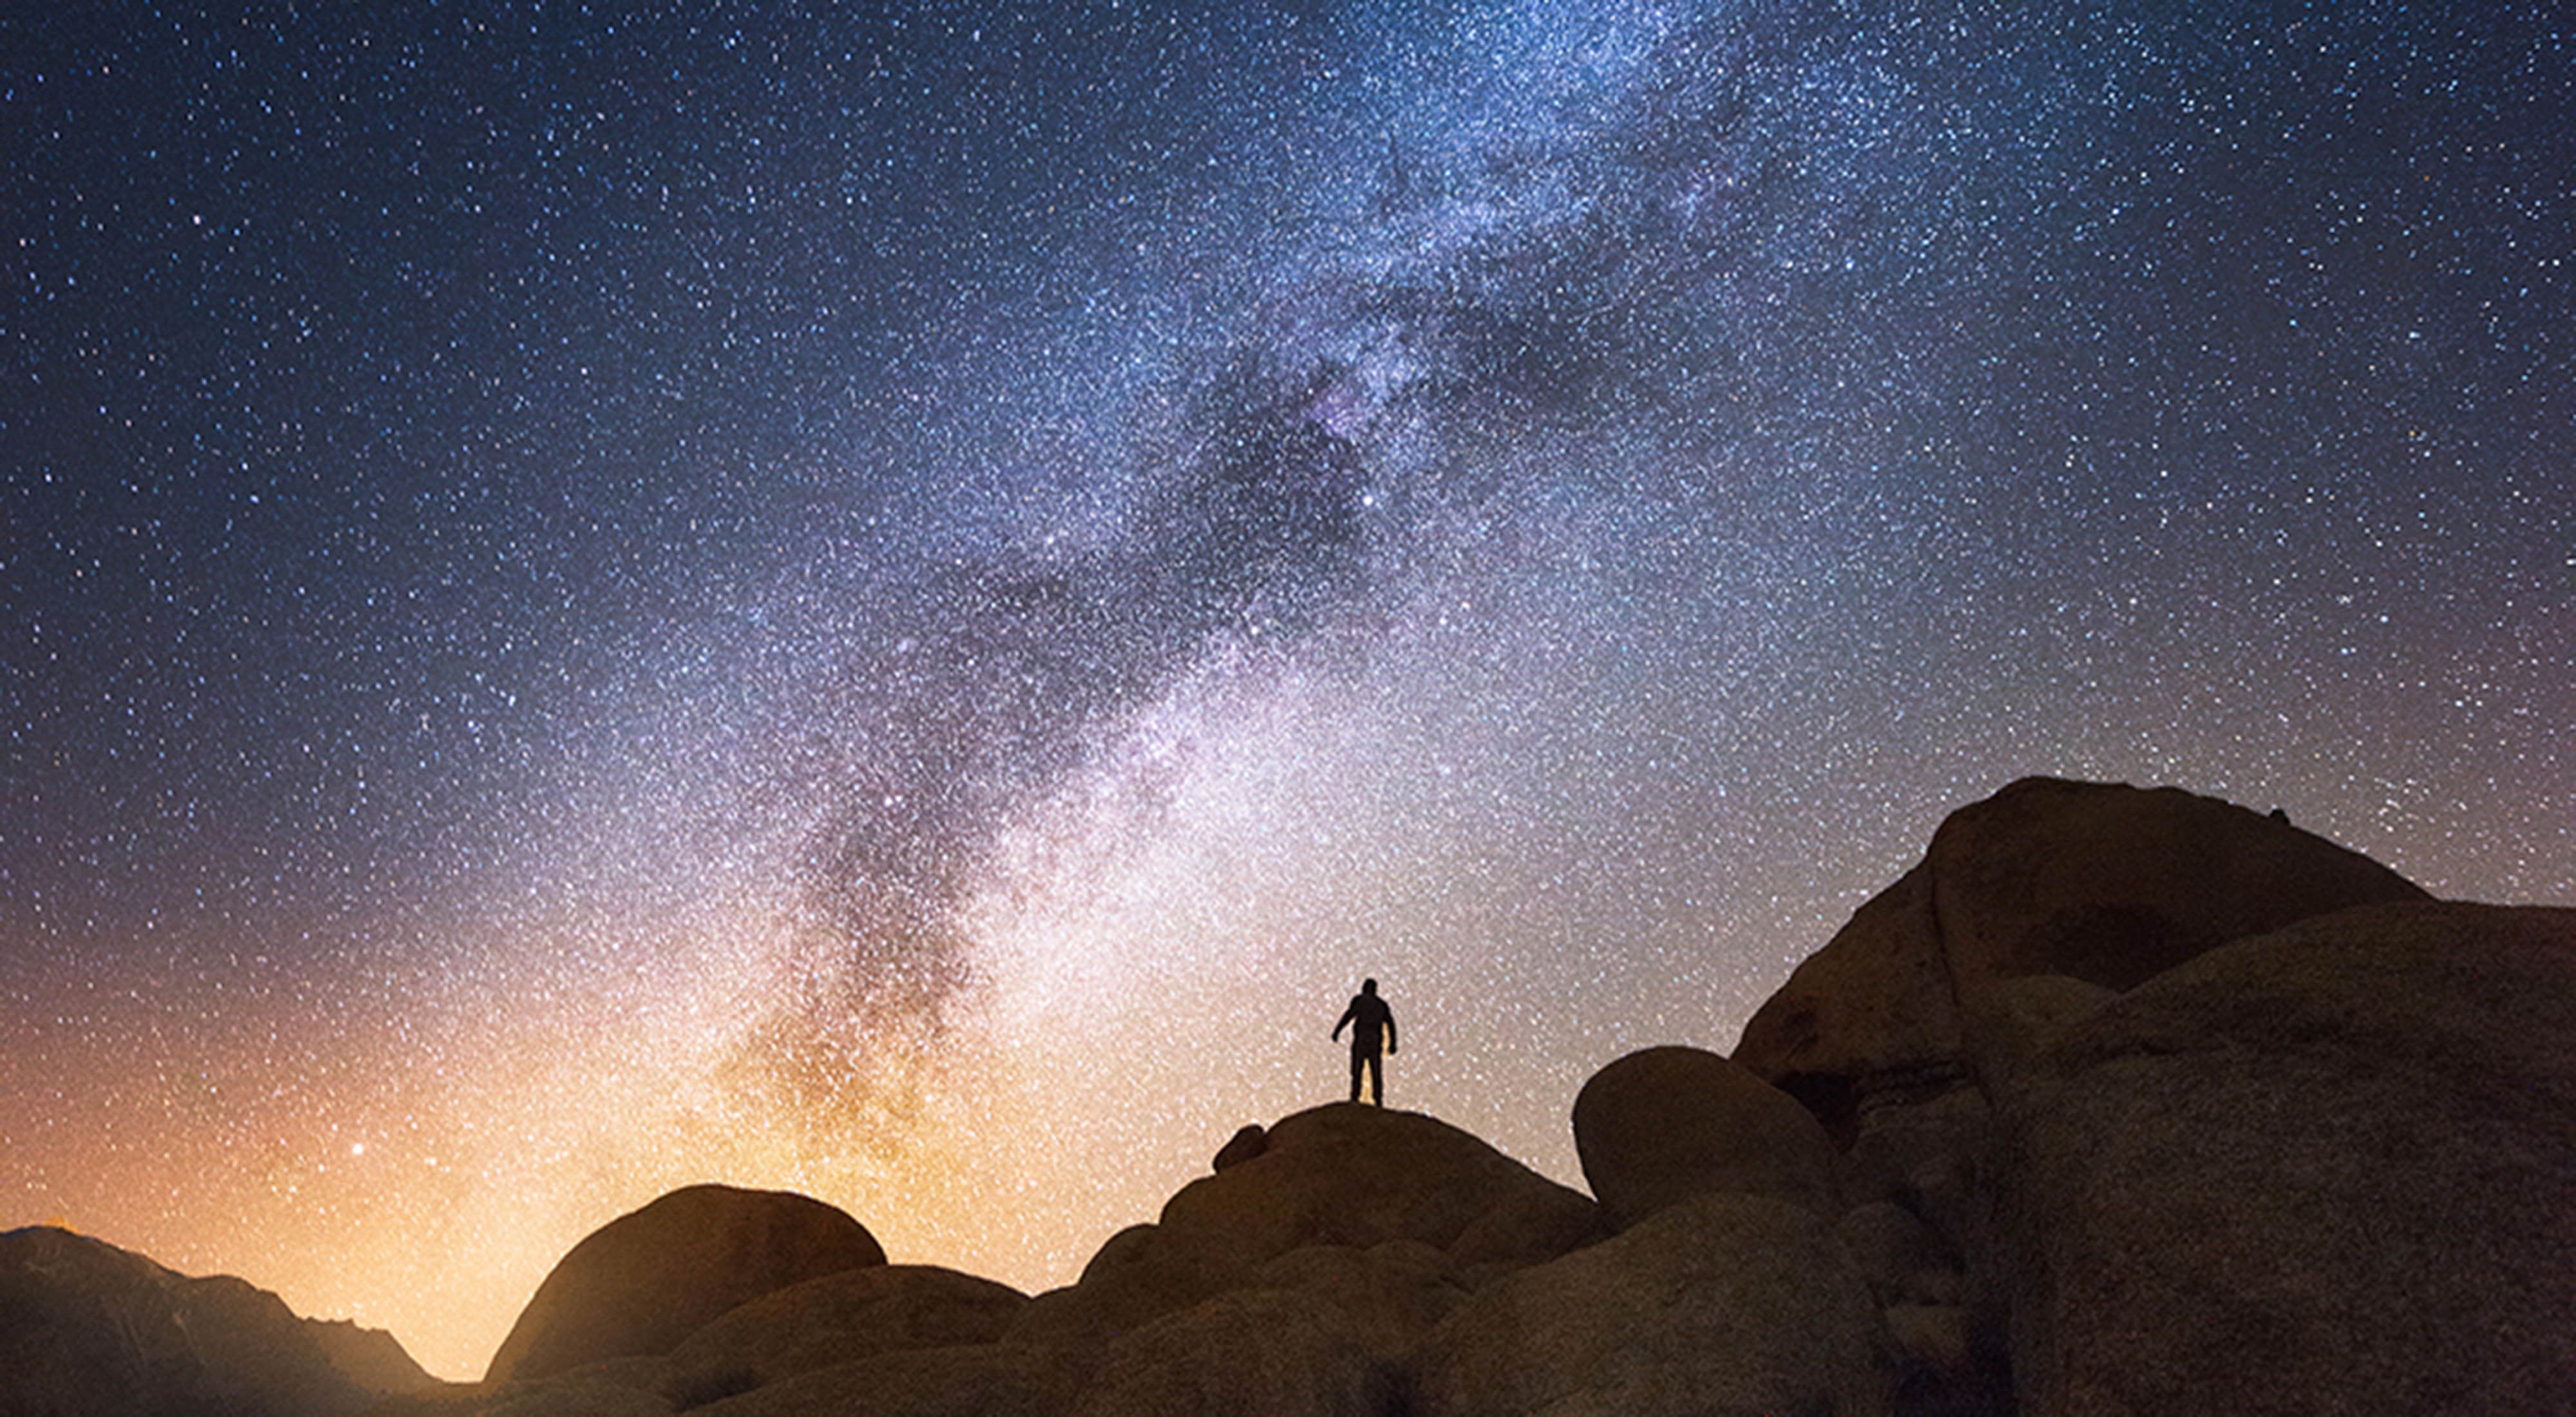 A hiker stands on a hill on a starry night.